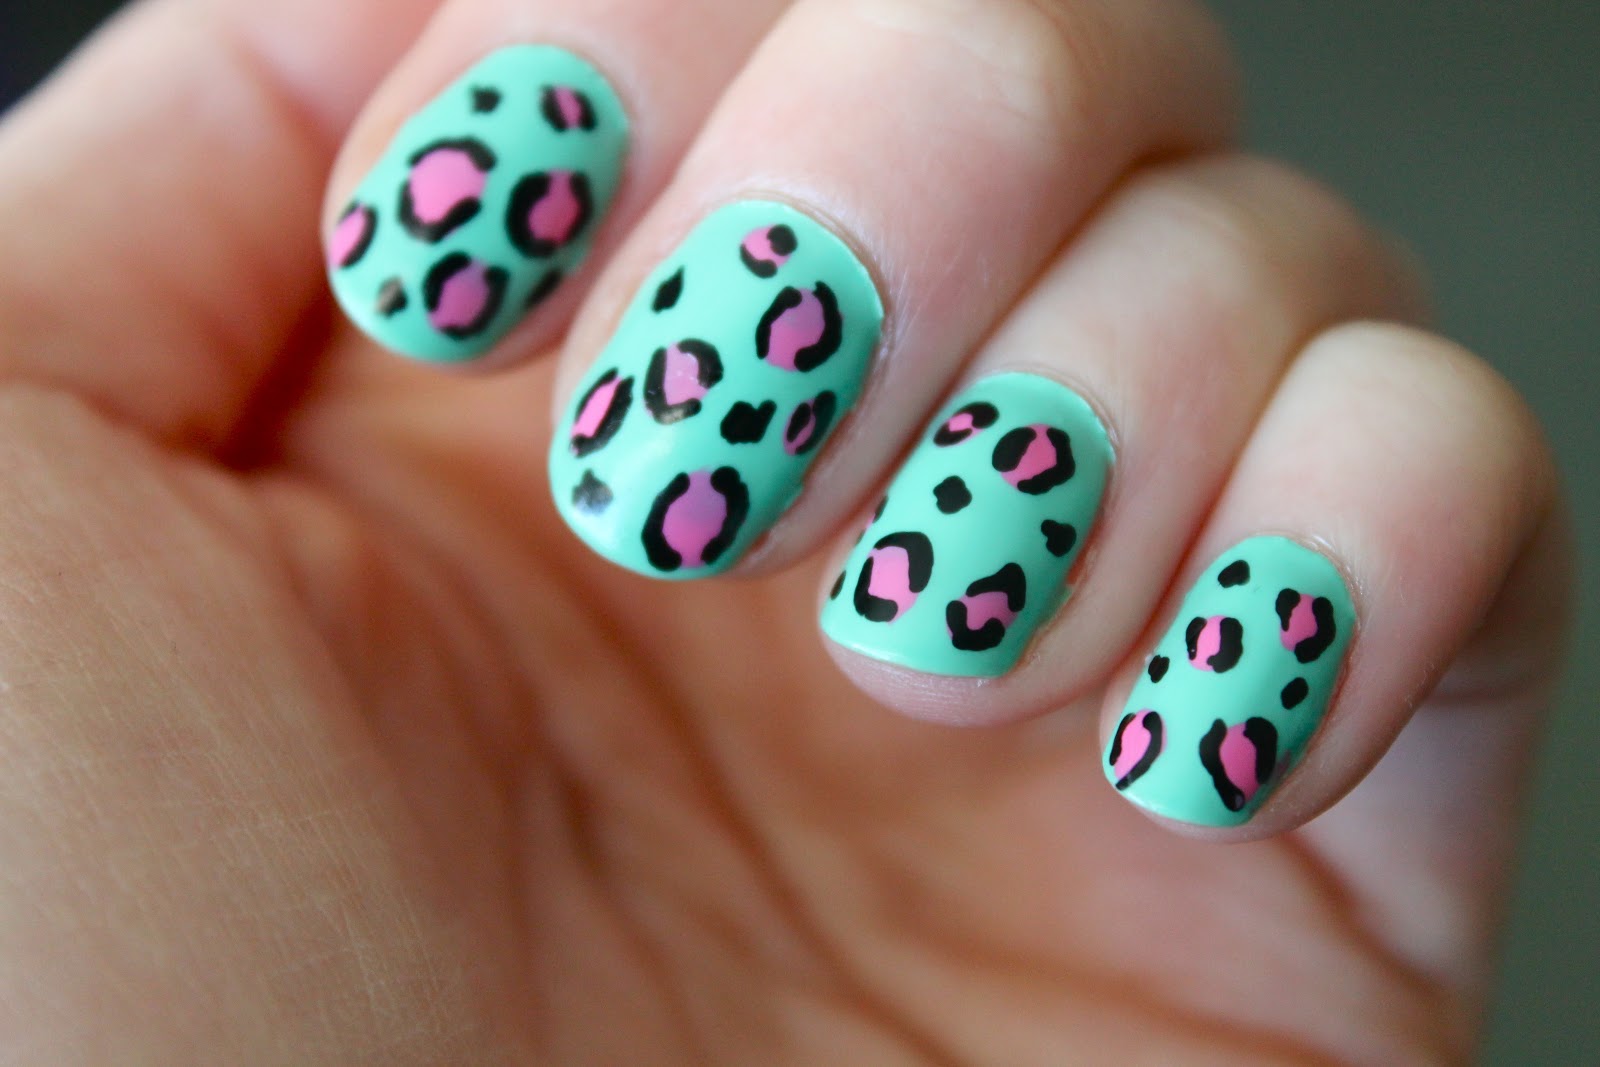 8. Step by Step Guide to Creating Cute Animal Nail Art - wide 10